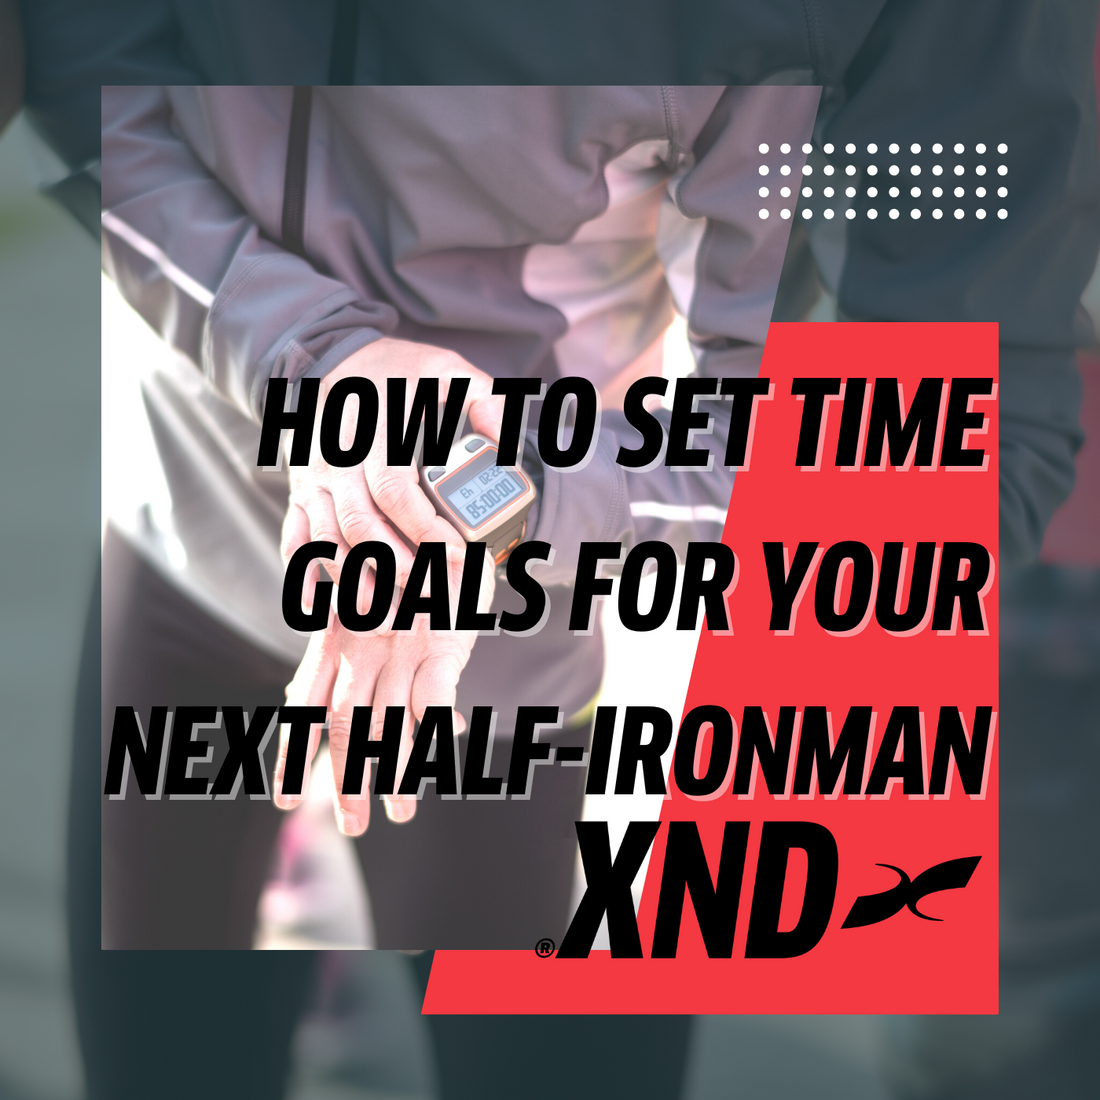 How To Set Time Goals For Your Next Half-Ironman?